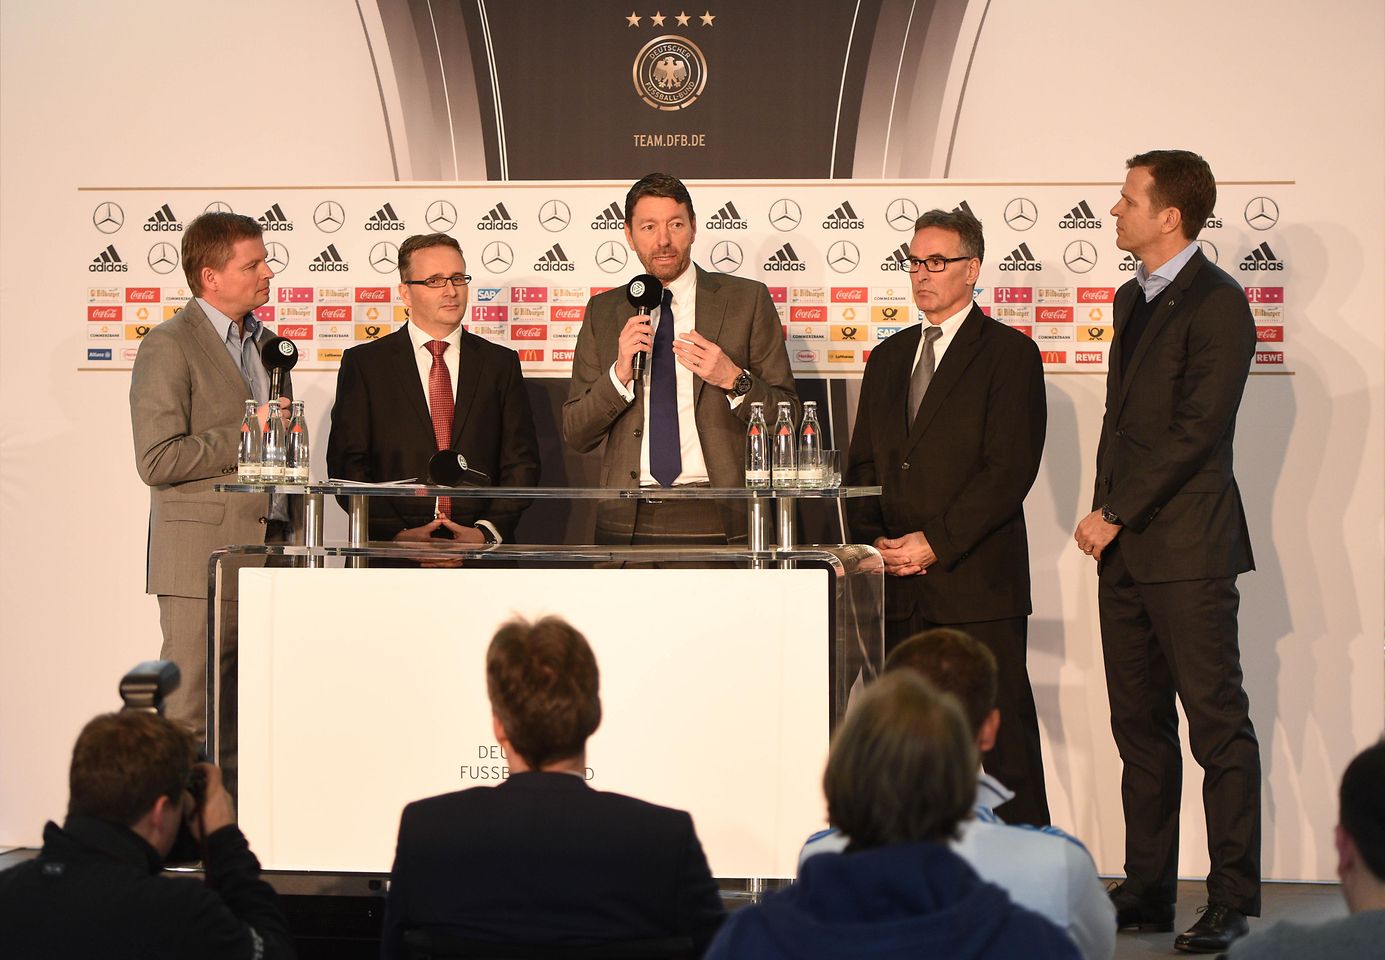 Press conference at DFB headquarters with Henkel CEO Kasper Rorsted (center).